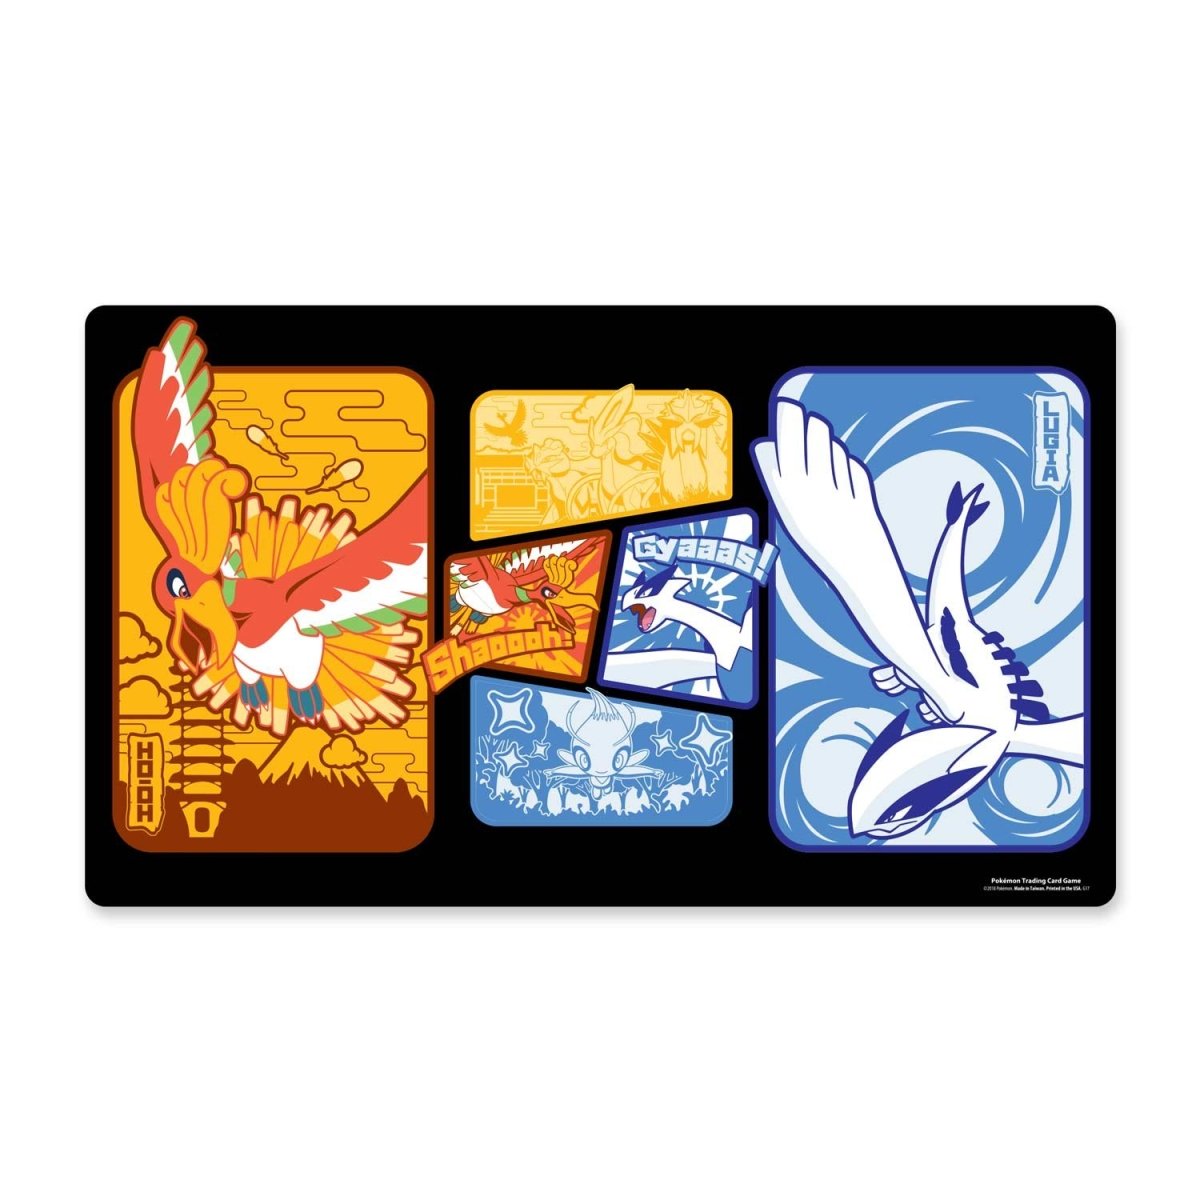 Lugia gets all the love, but ST Ho-Oh is gorgeous : r/PokemonTCG